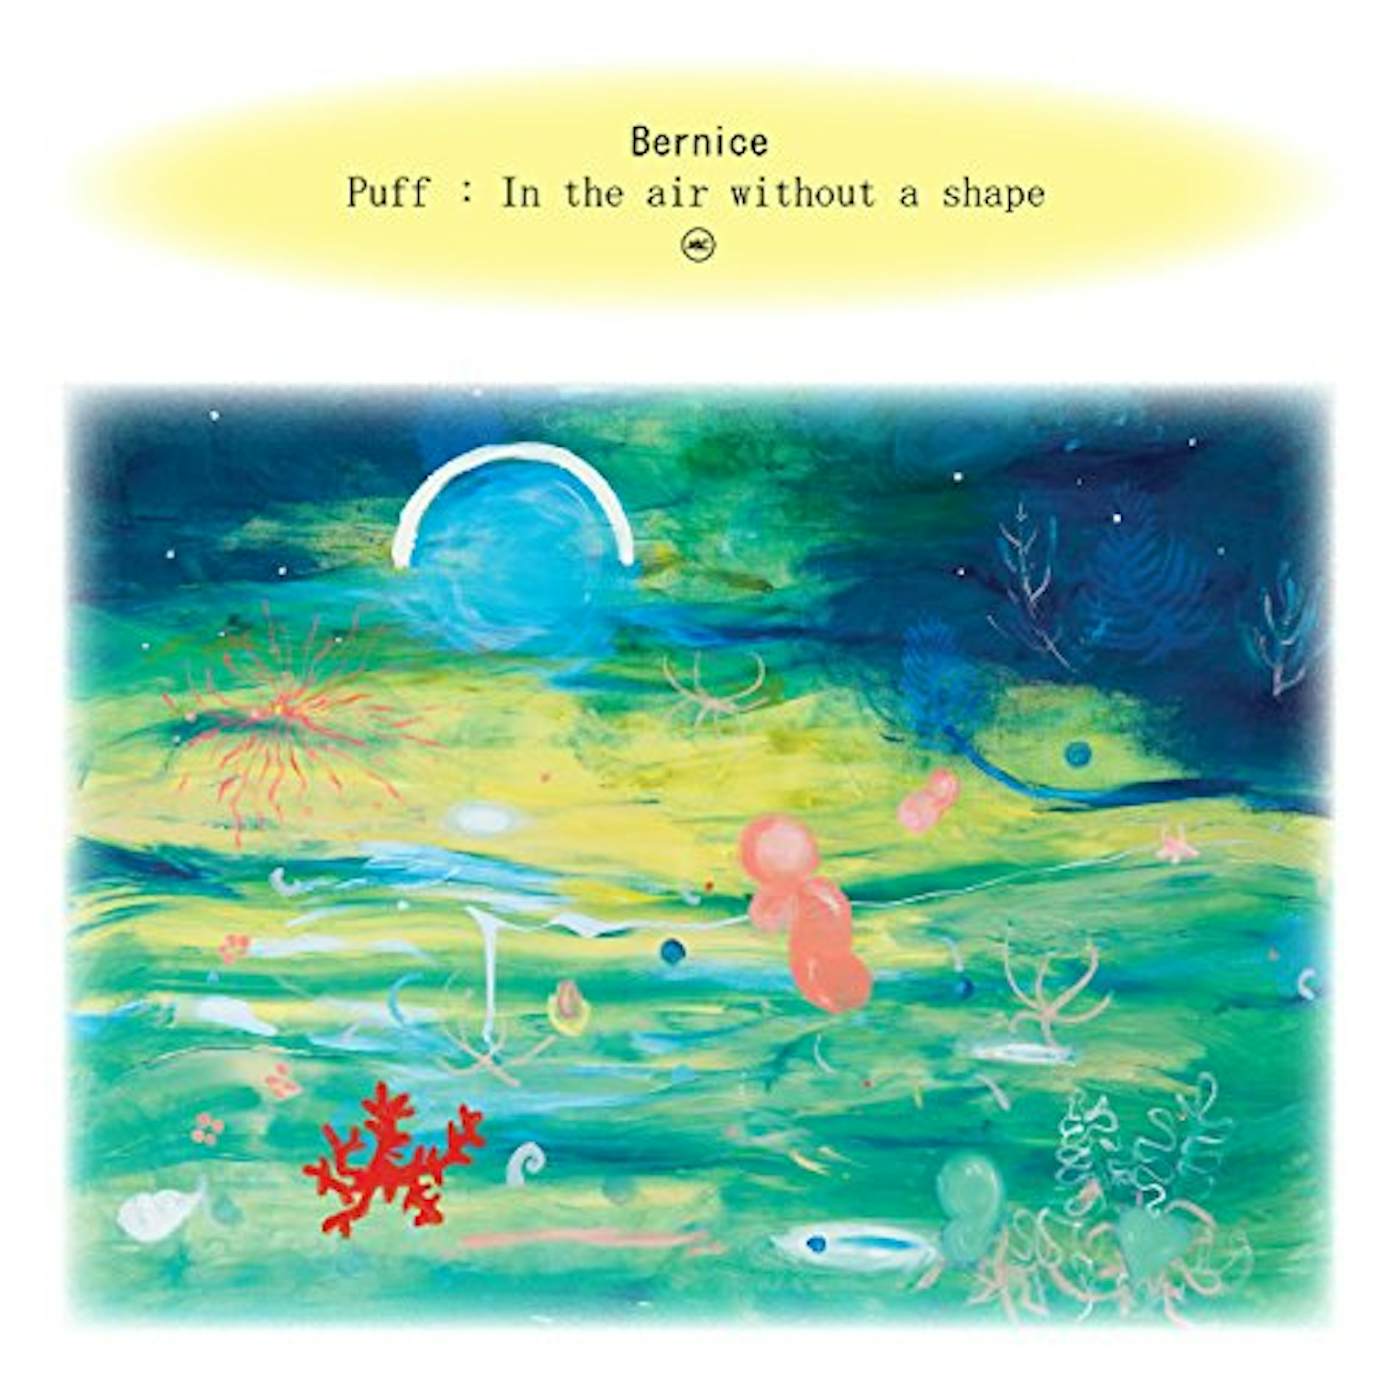 Bernice PUFF: IN THE AIR WITHOUT A SHAPE CD